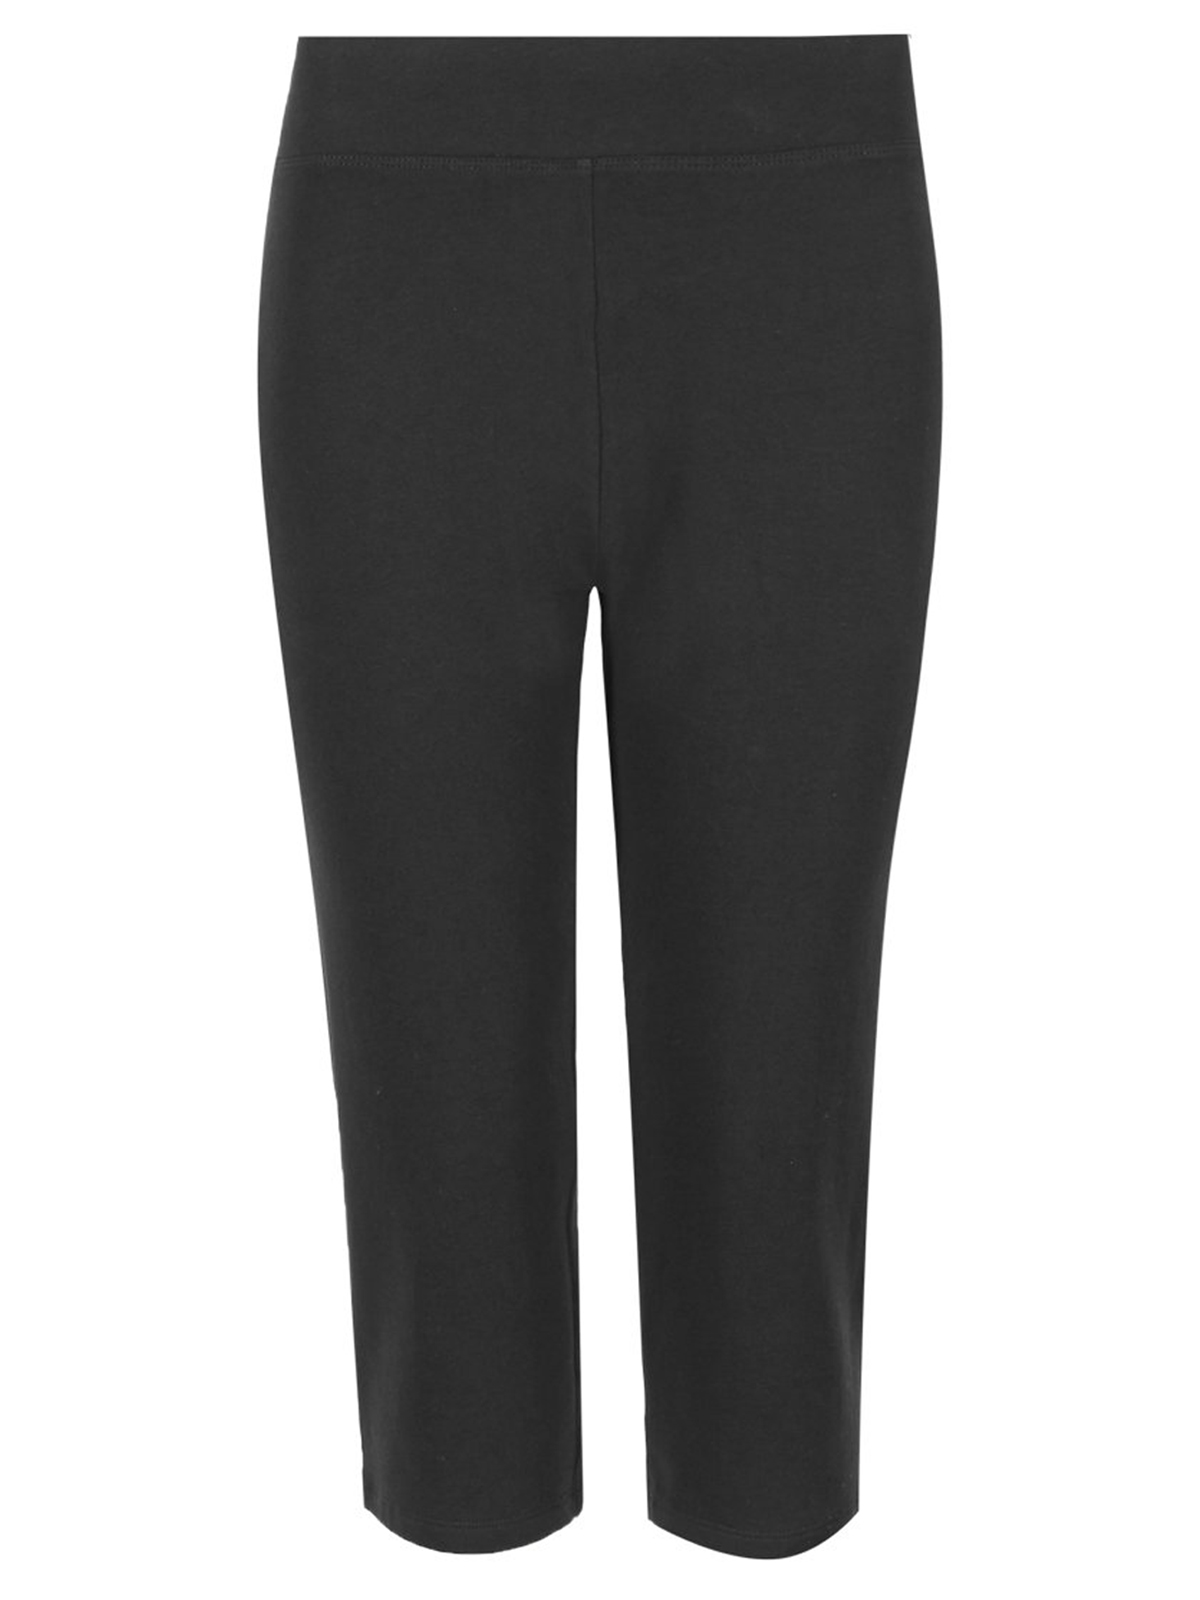 Marks and Spencer - - M&5 BLACK Cotton Rich Cropped Joggers - Size 6 to 8